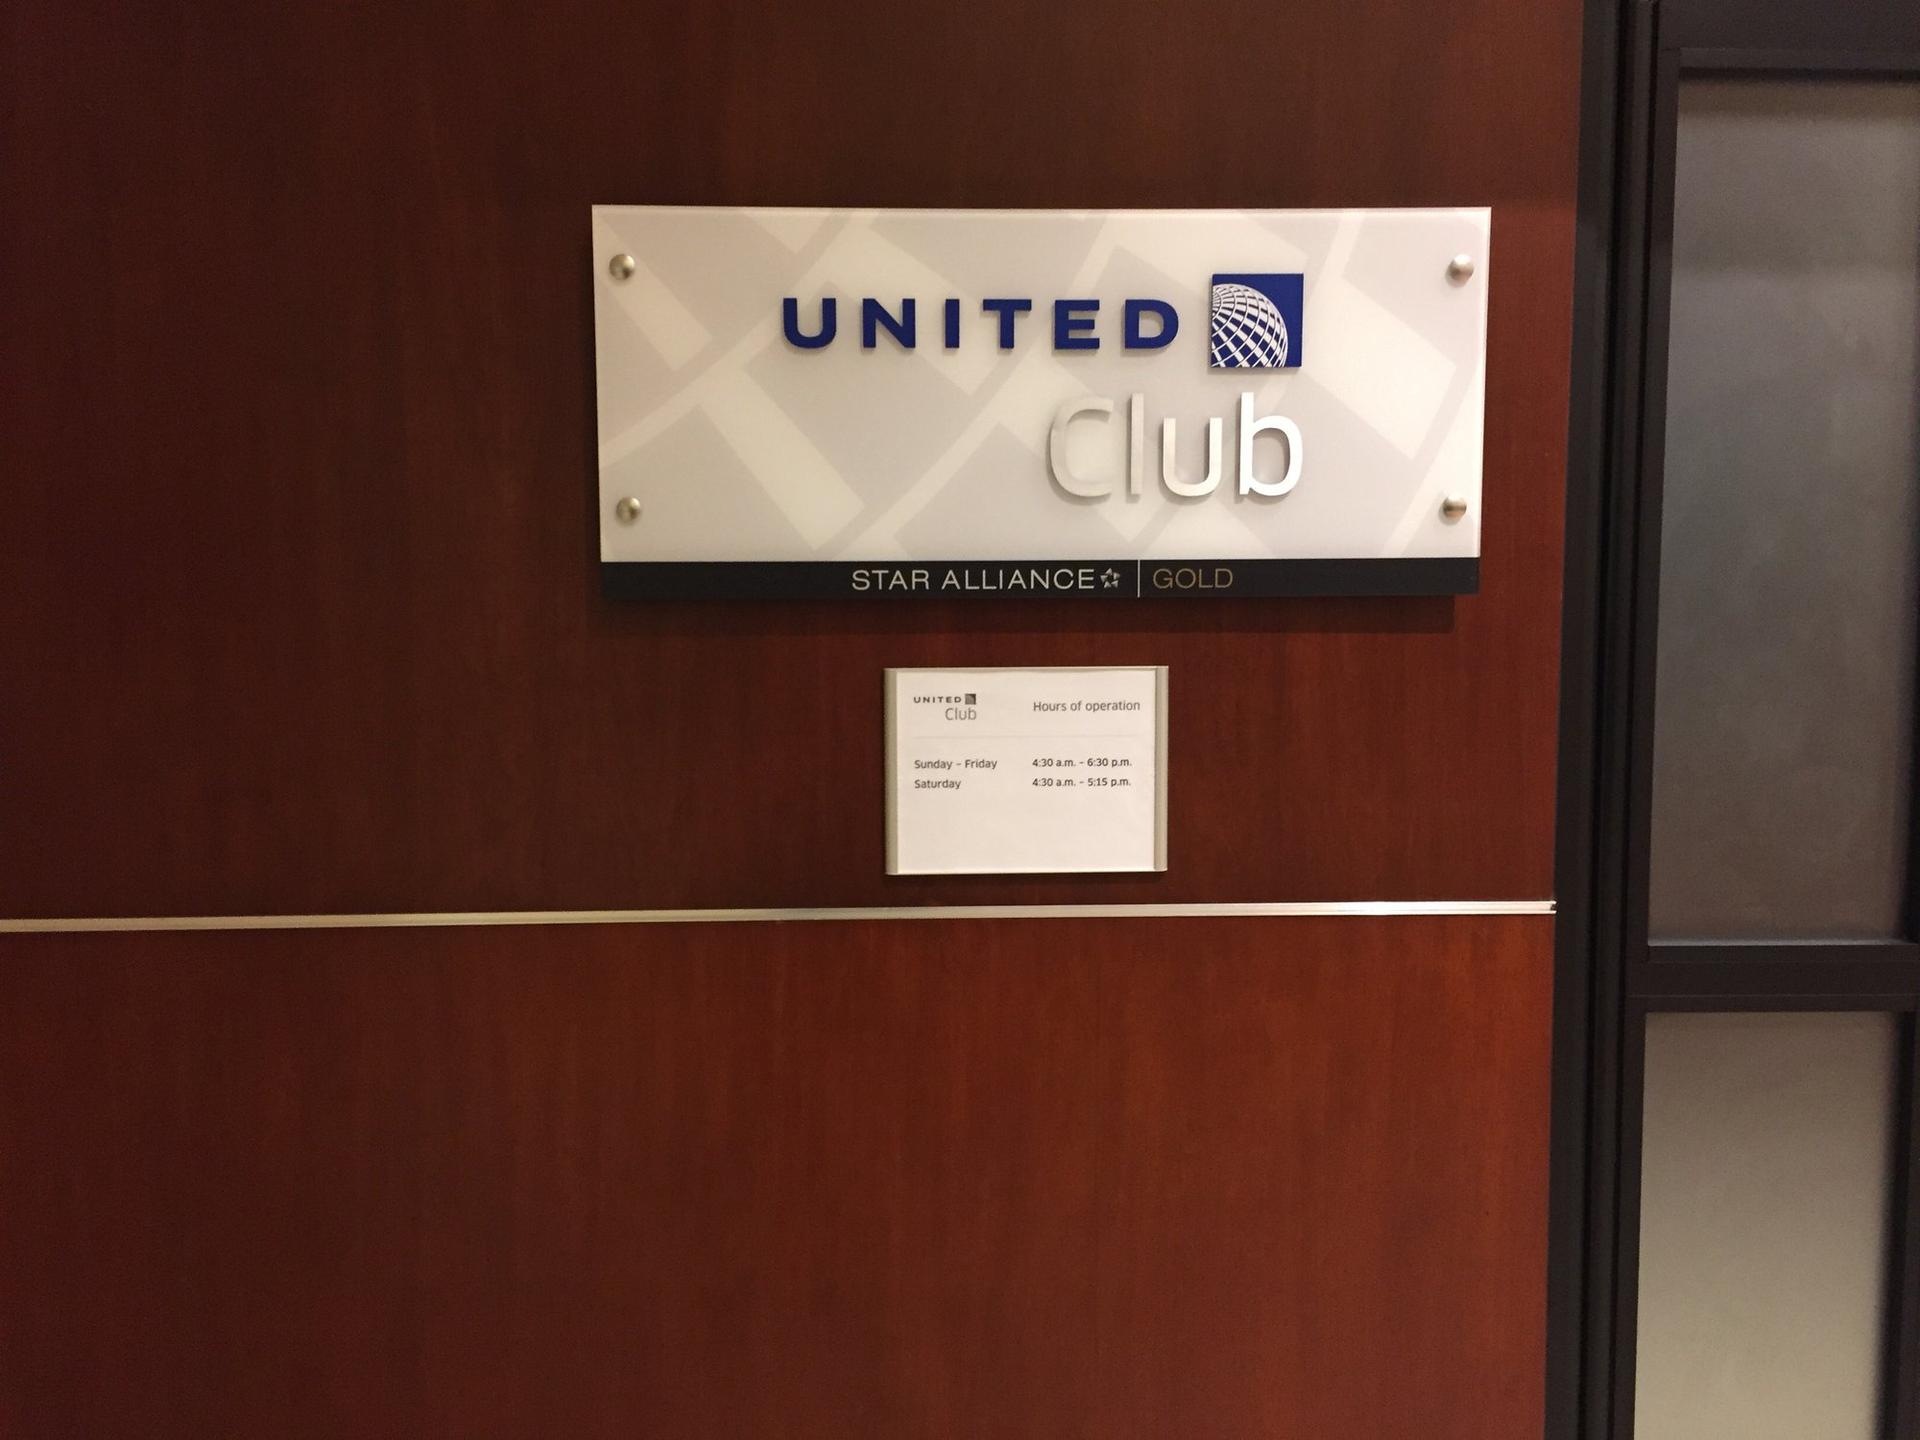 United Airlines United Club image 9 of 22